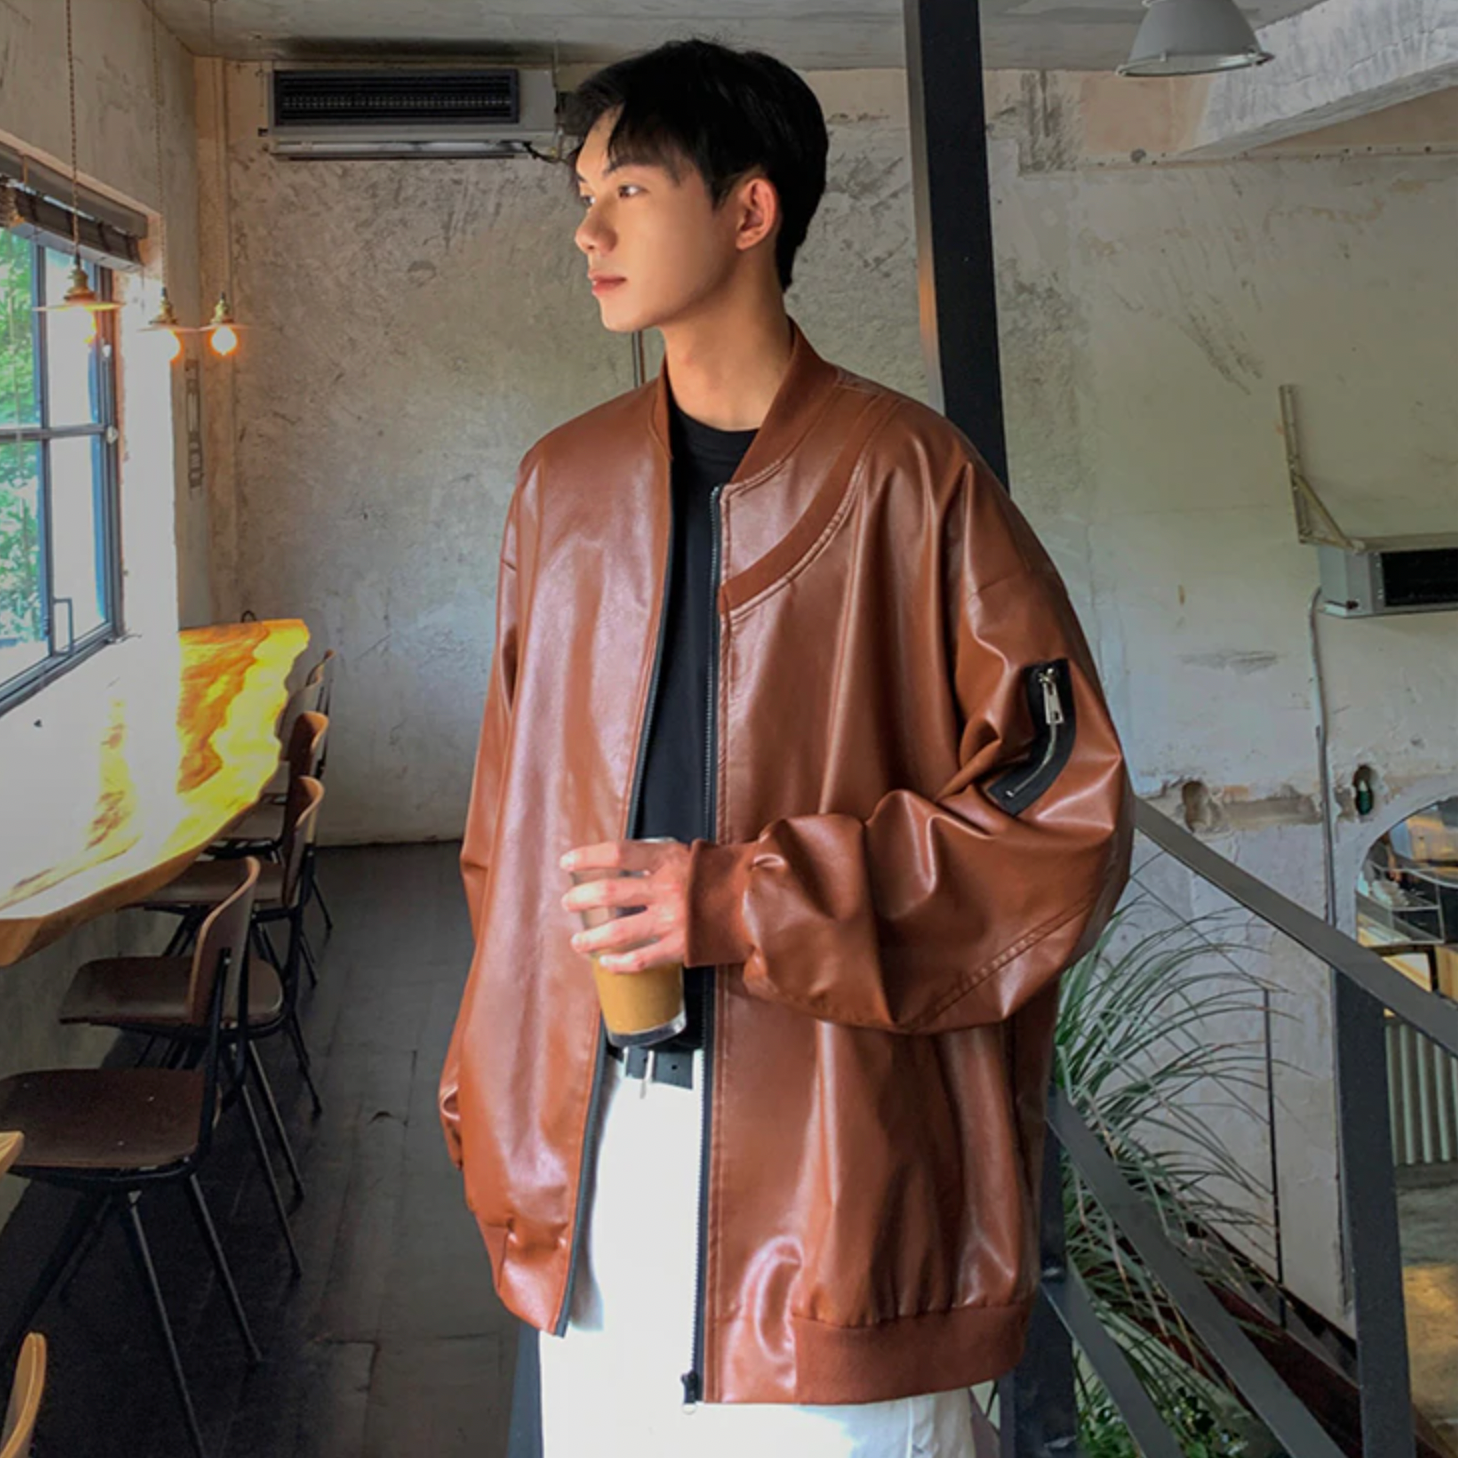 Korean Slim Fit Motorcycle Jacket With Turn Down Collar High Quality PU  Leather For Autumn/Winter Mens Fall Fashion Coat From Long005, $51.1 |  DHgate.Com